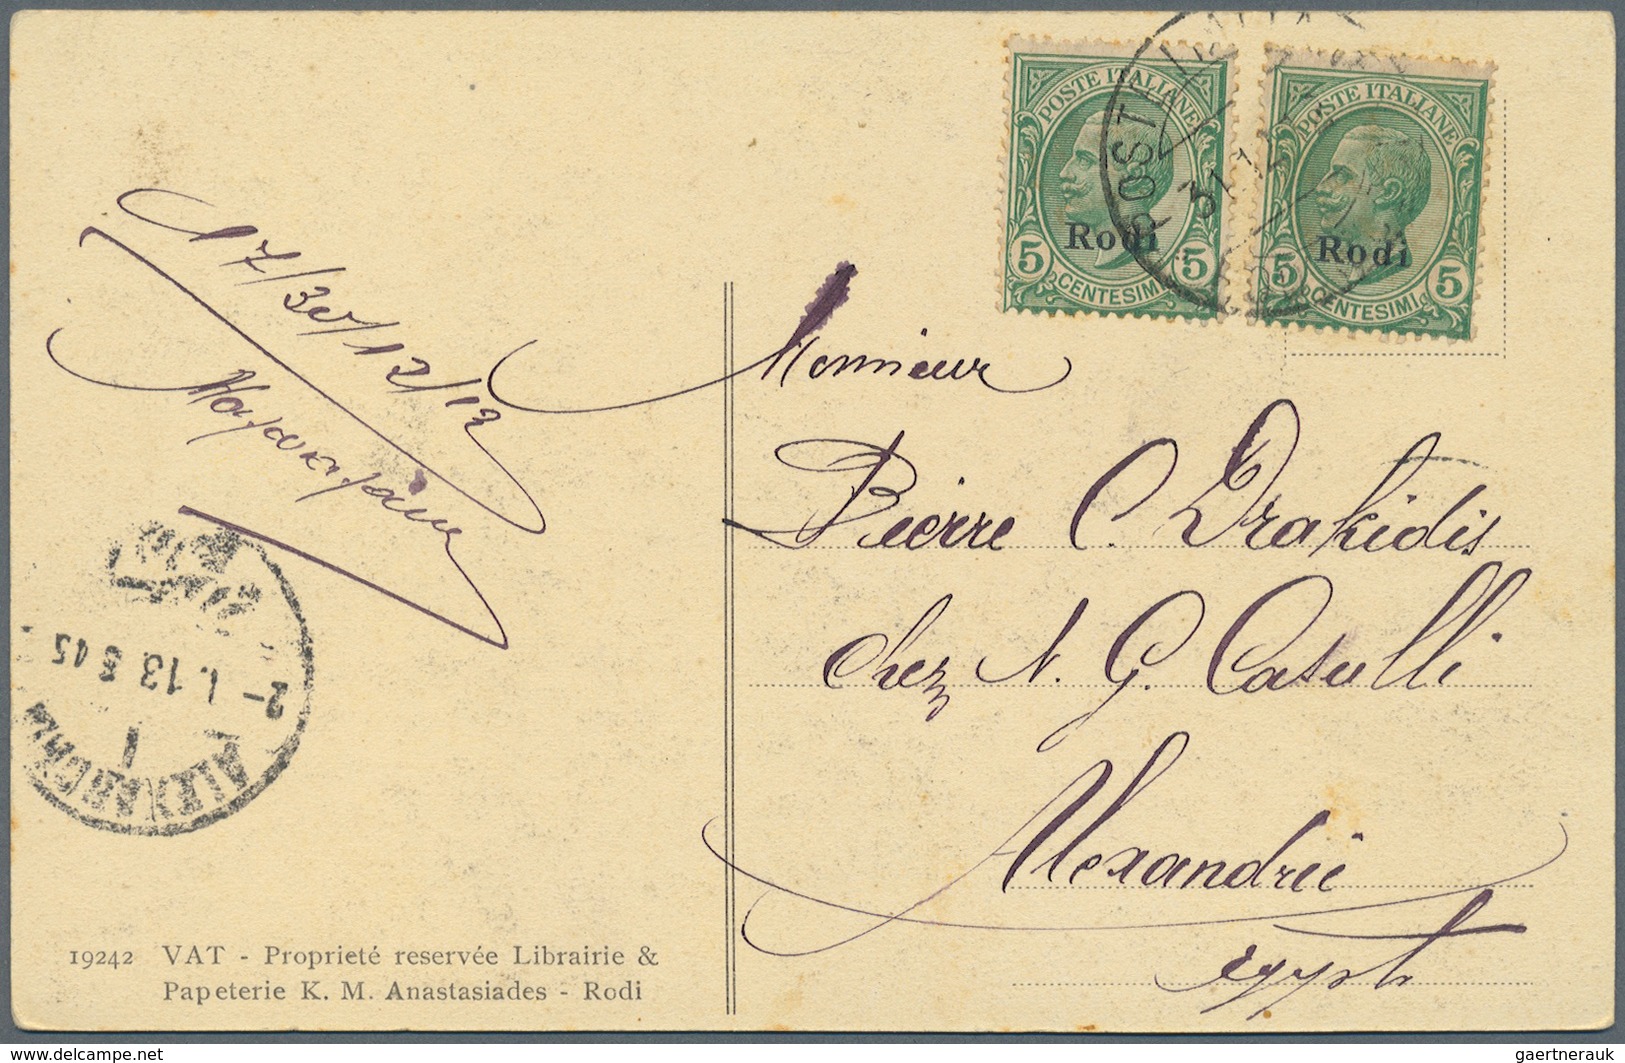 Br/ Griechenland: 1900-1922, 34 covers / cards including good cancellations of italian occupation Dodeca